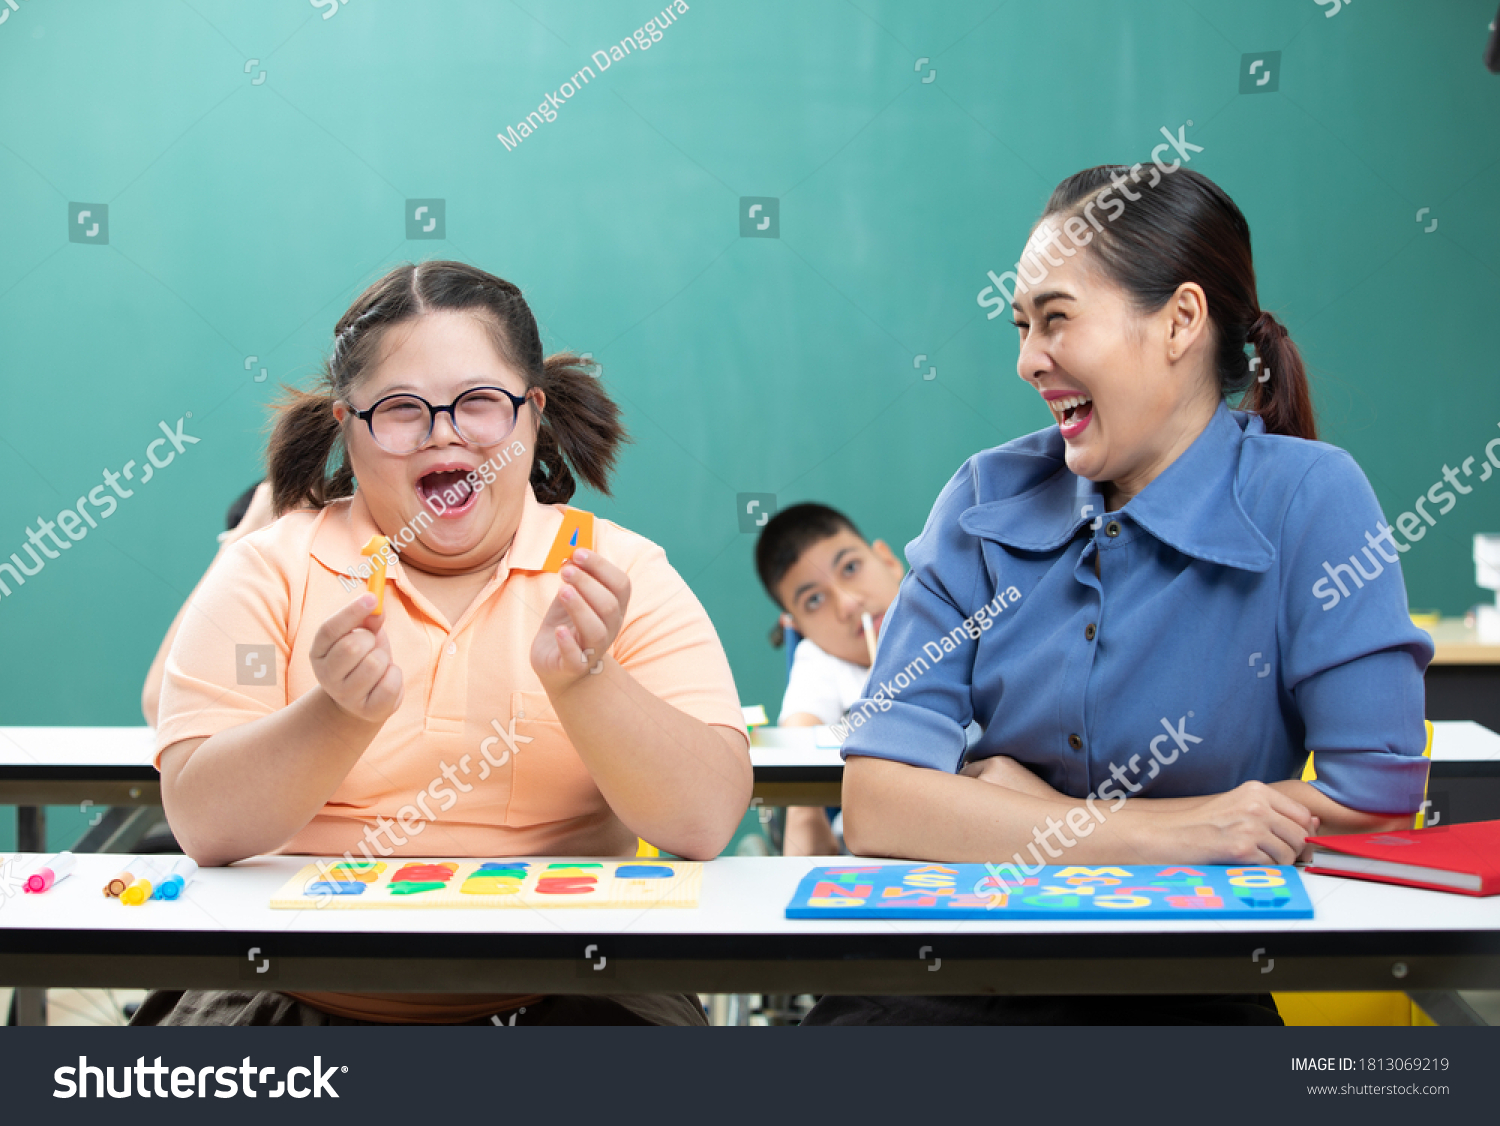 portrait asian disabled child or down syndrome child showing alphabet toy puzzle and woman teacher helping in classroom #1813069219